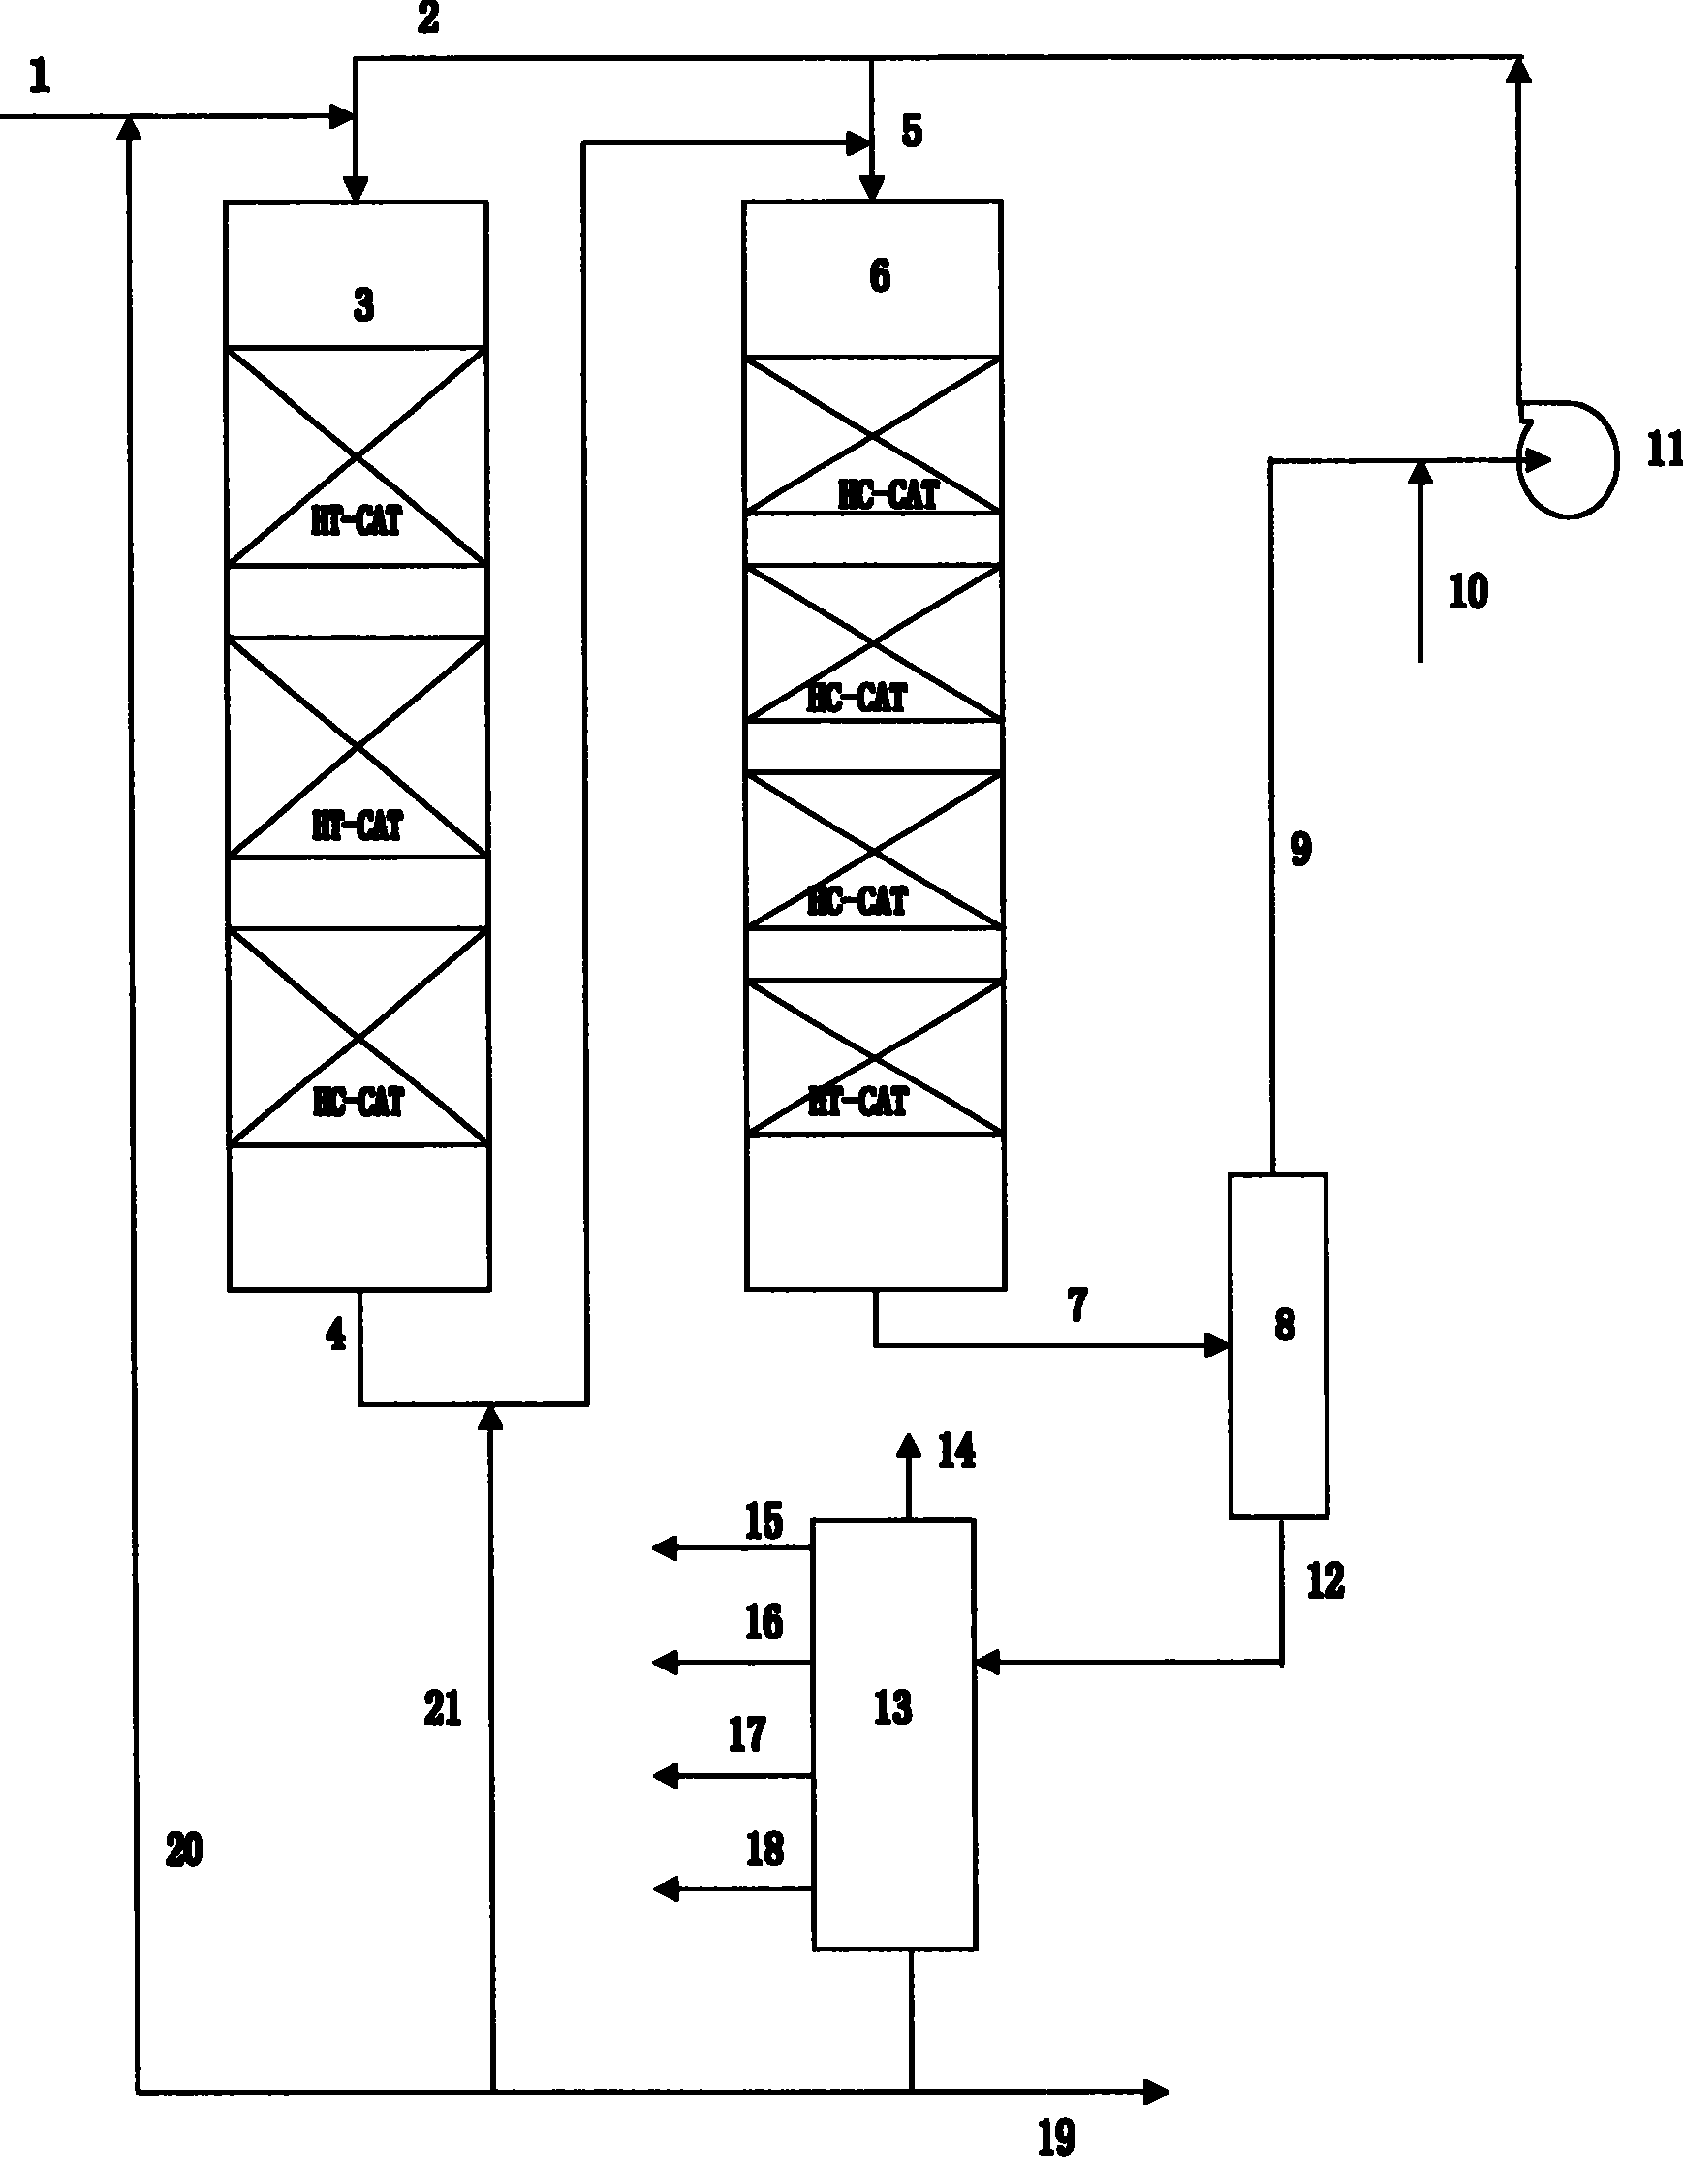 One-stage serial hydrocracking method